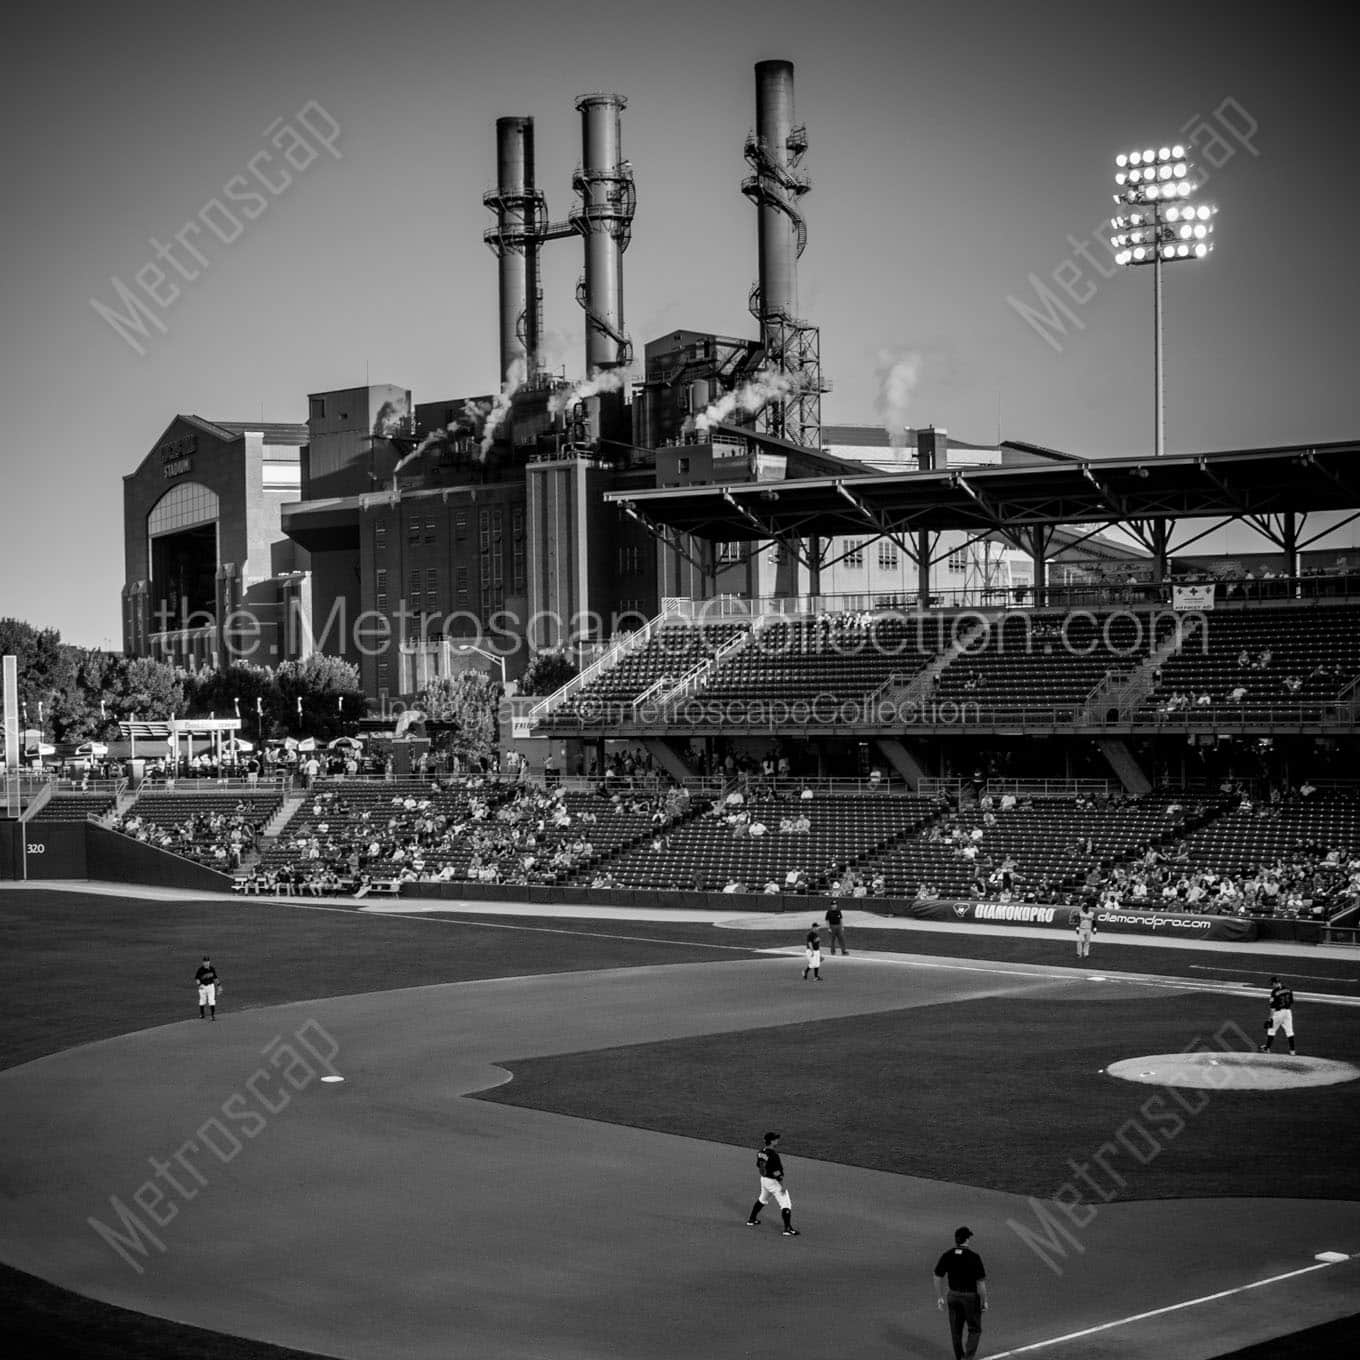 victory field citizens thermal power plant Black & White Office Art